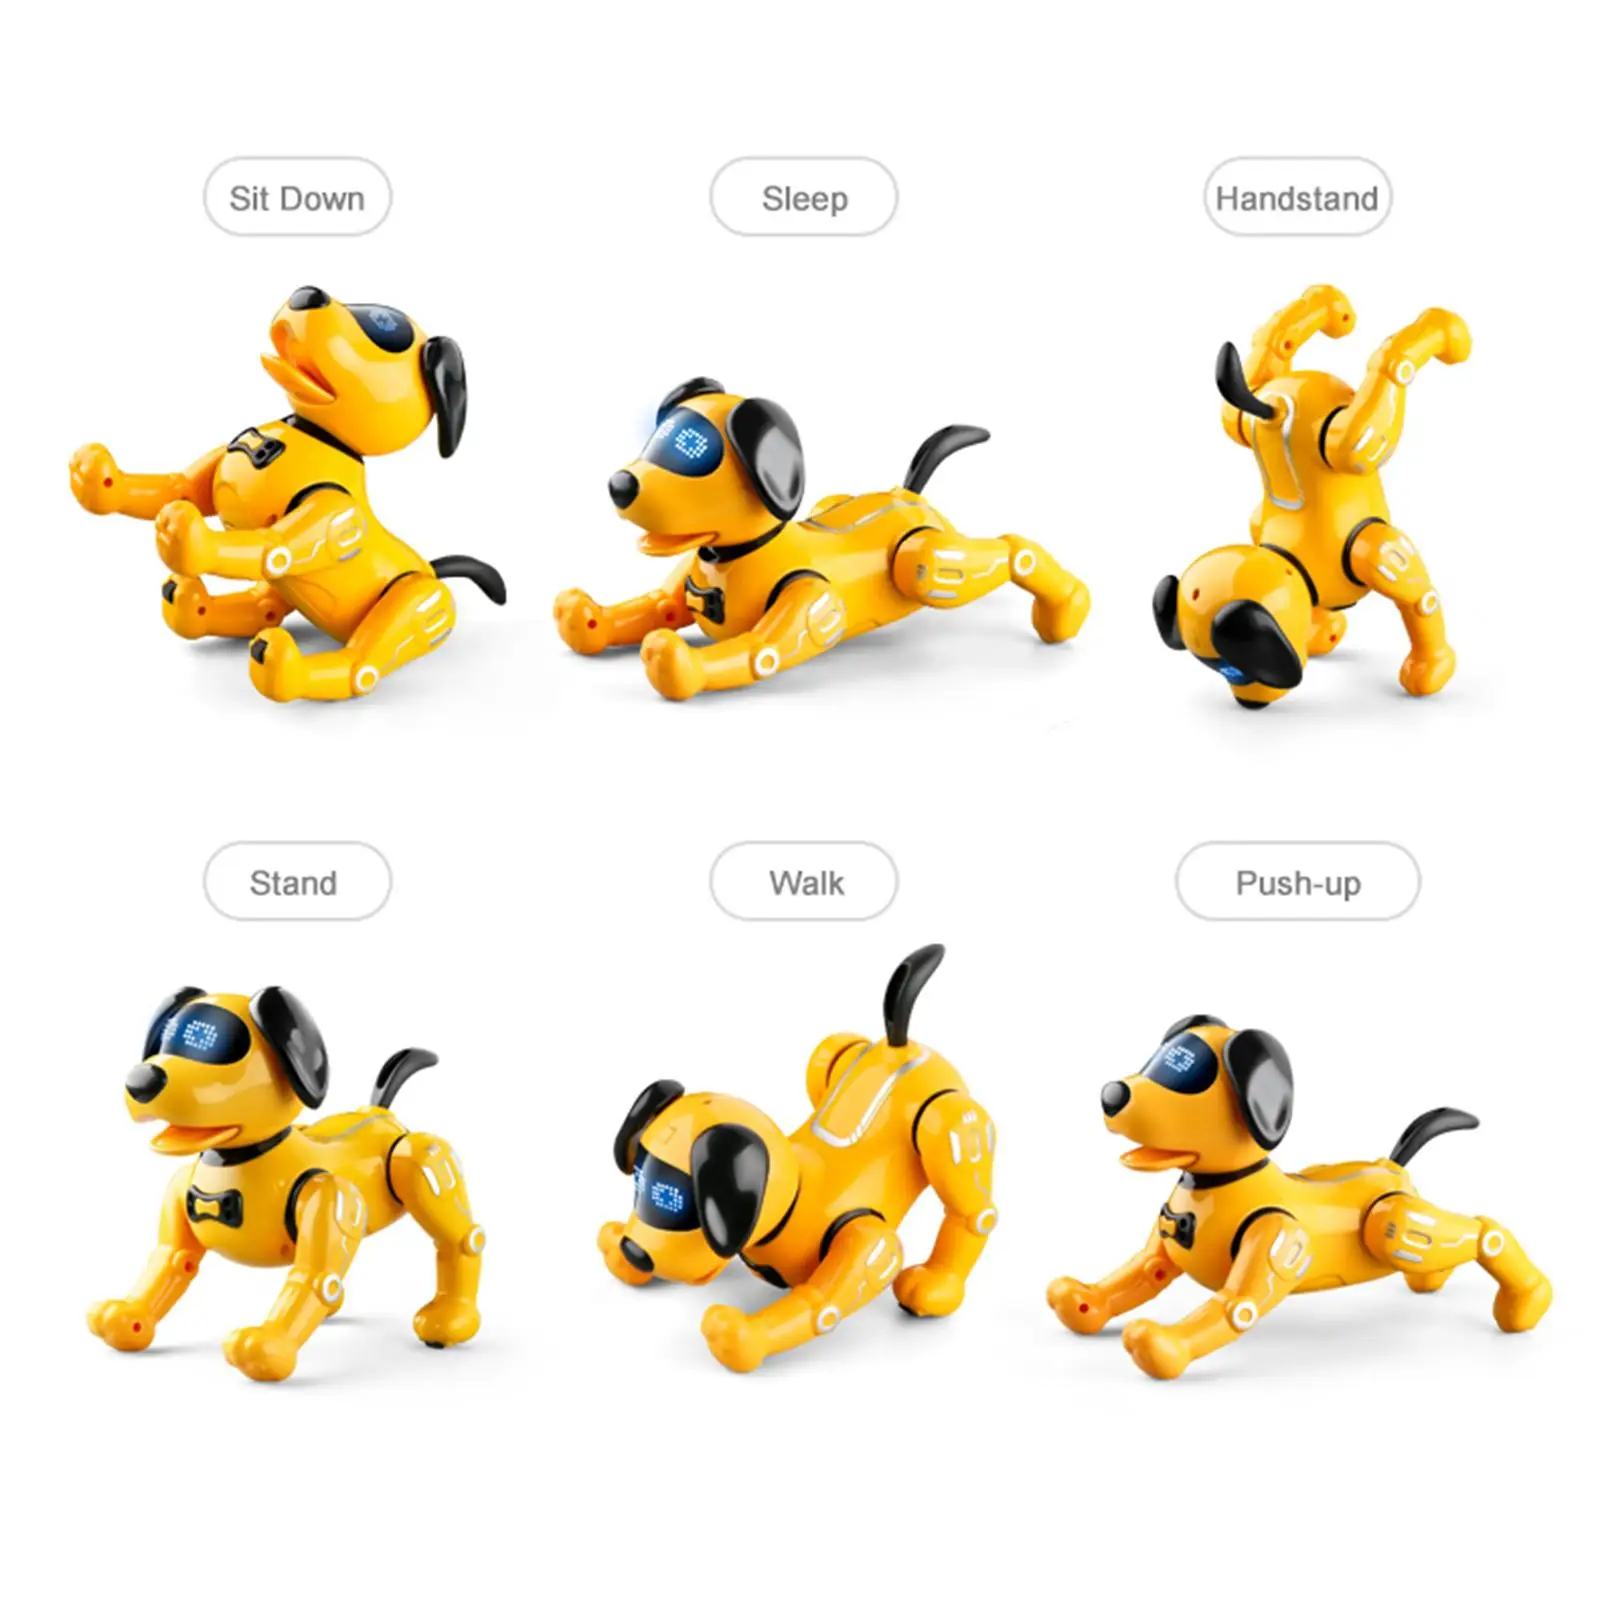 Remote Control Robot Dog Toy Dancing Voice Remote Control Toy Handstand RC Robot Dog for Children Kids Boys and Girls Toddlers